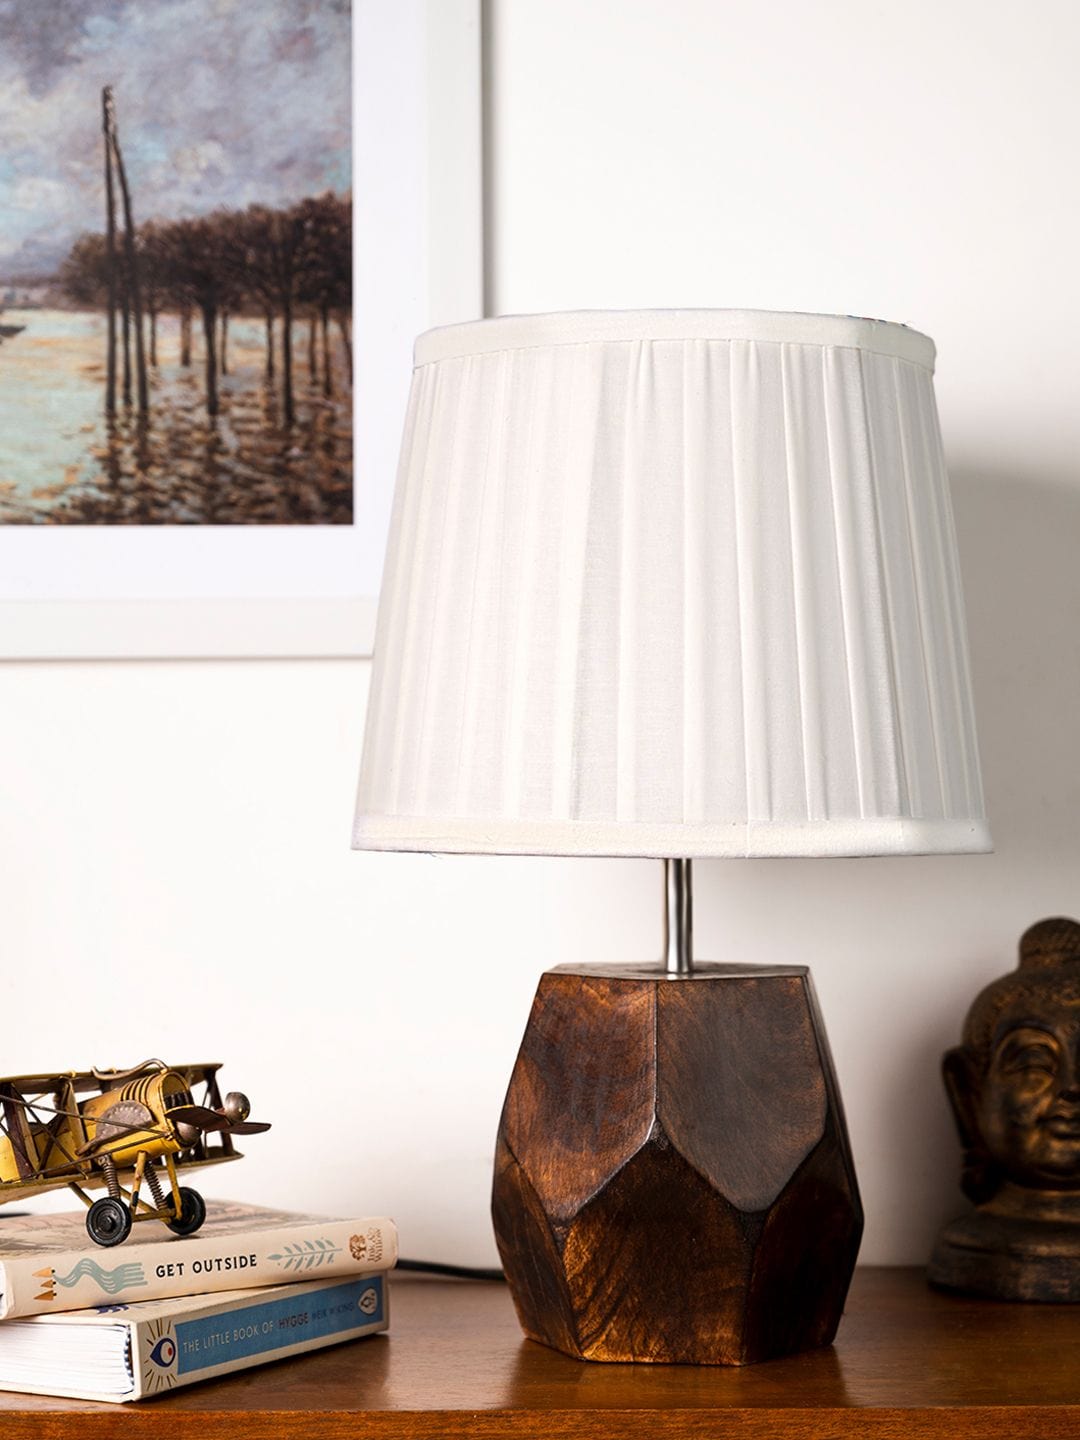 Wooden Hexa Lamp with Pleeted Cotton White Shade